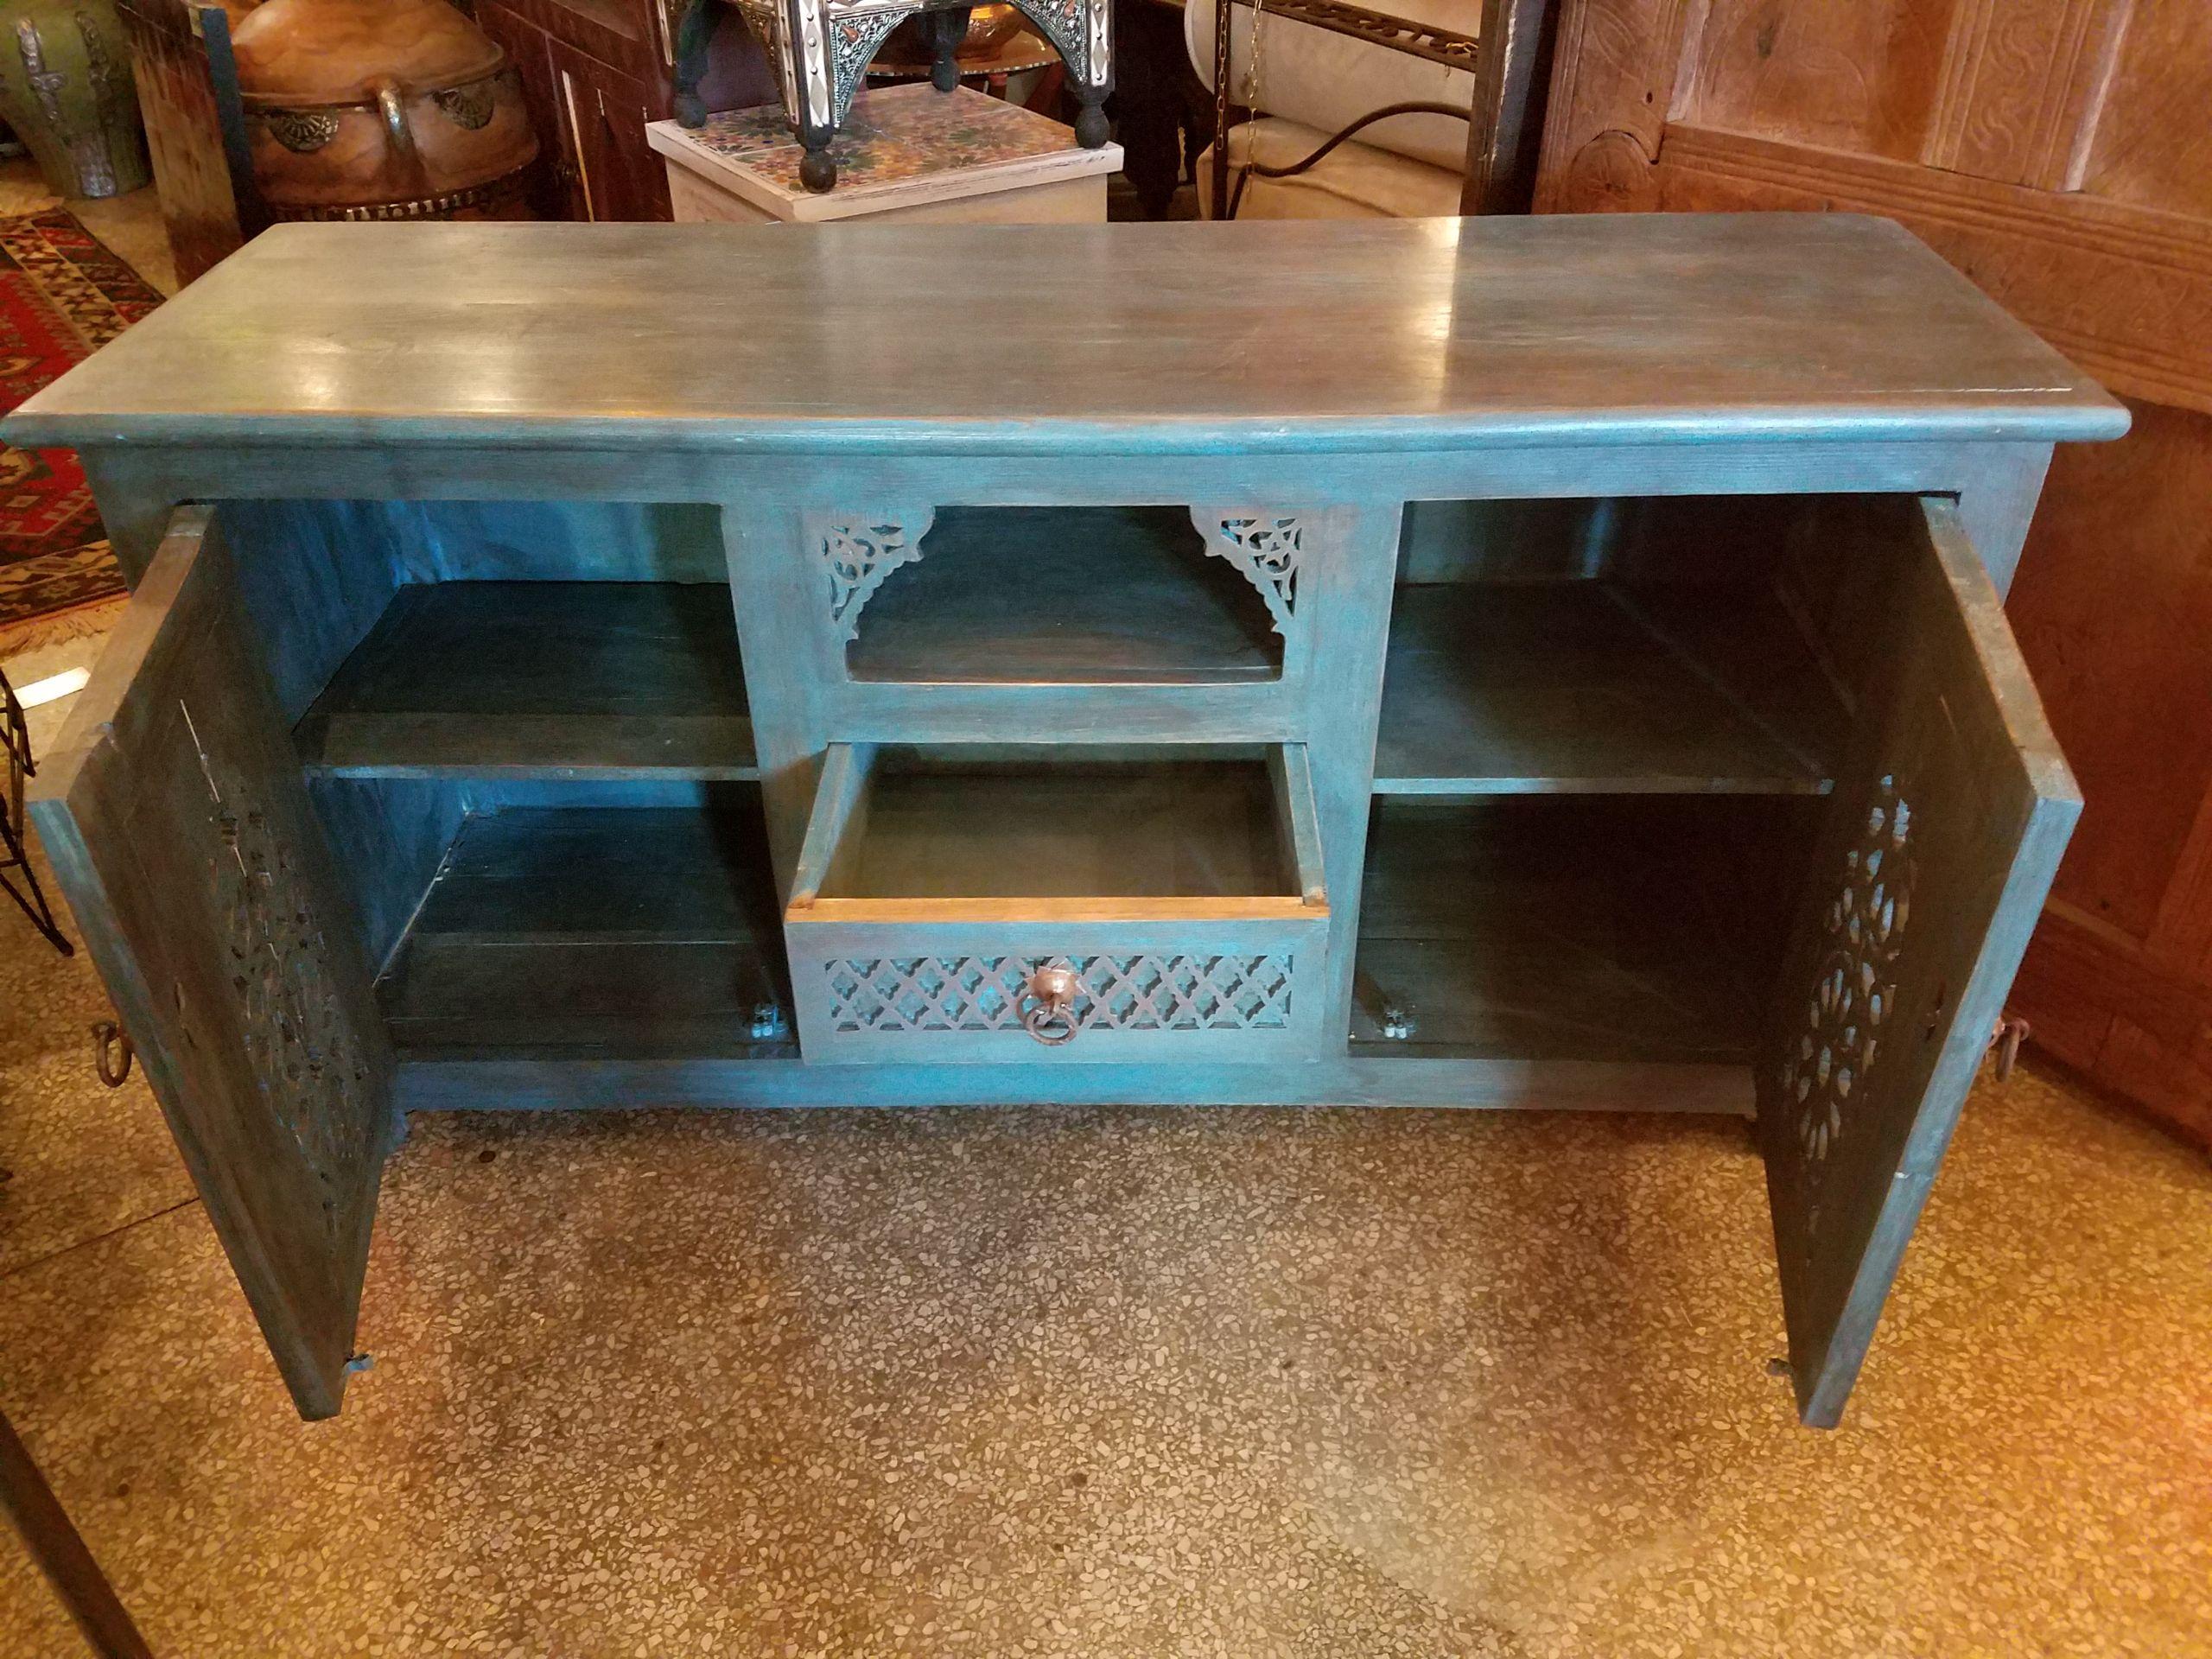 Moroccan Turquoise Media Stand, Cedar Wood In Excellent Condition For Sale In Orlando, FL